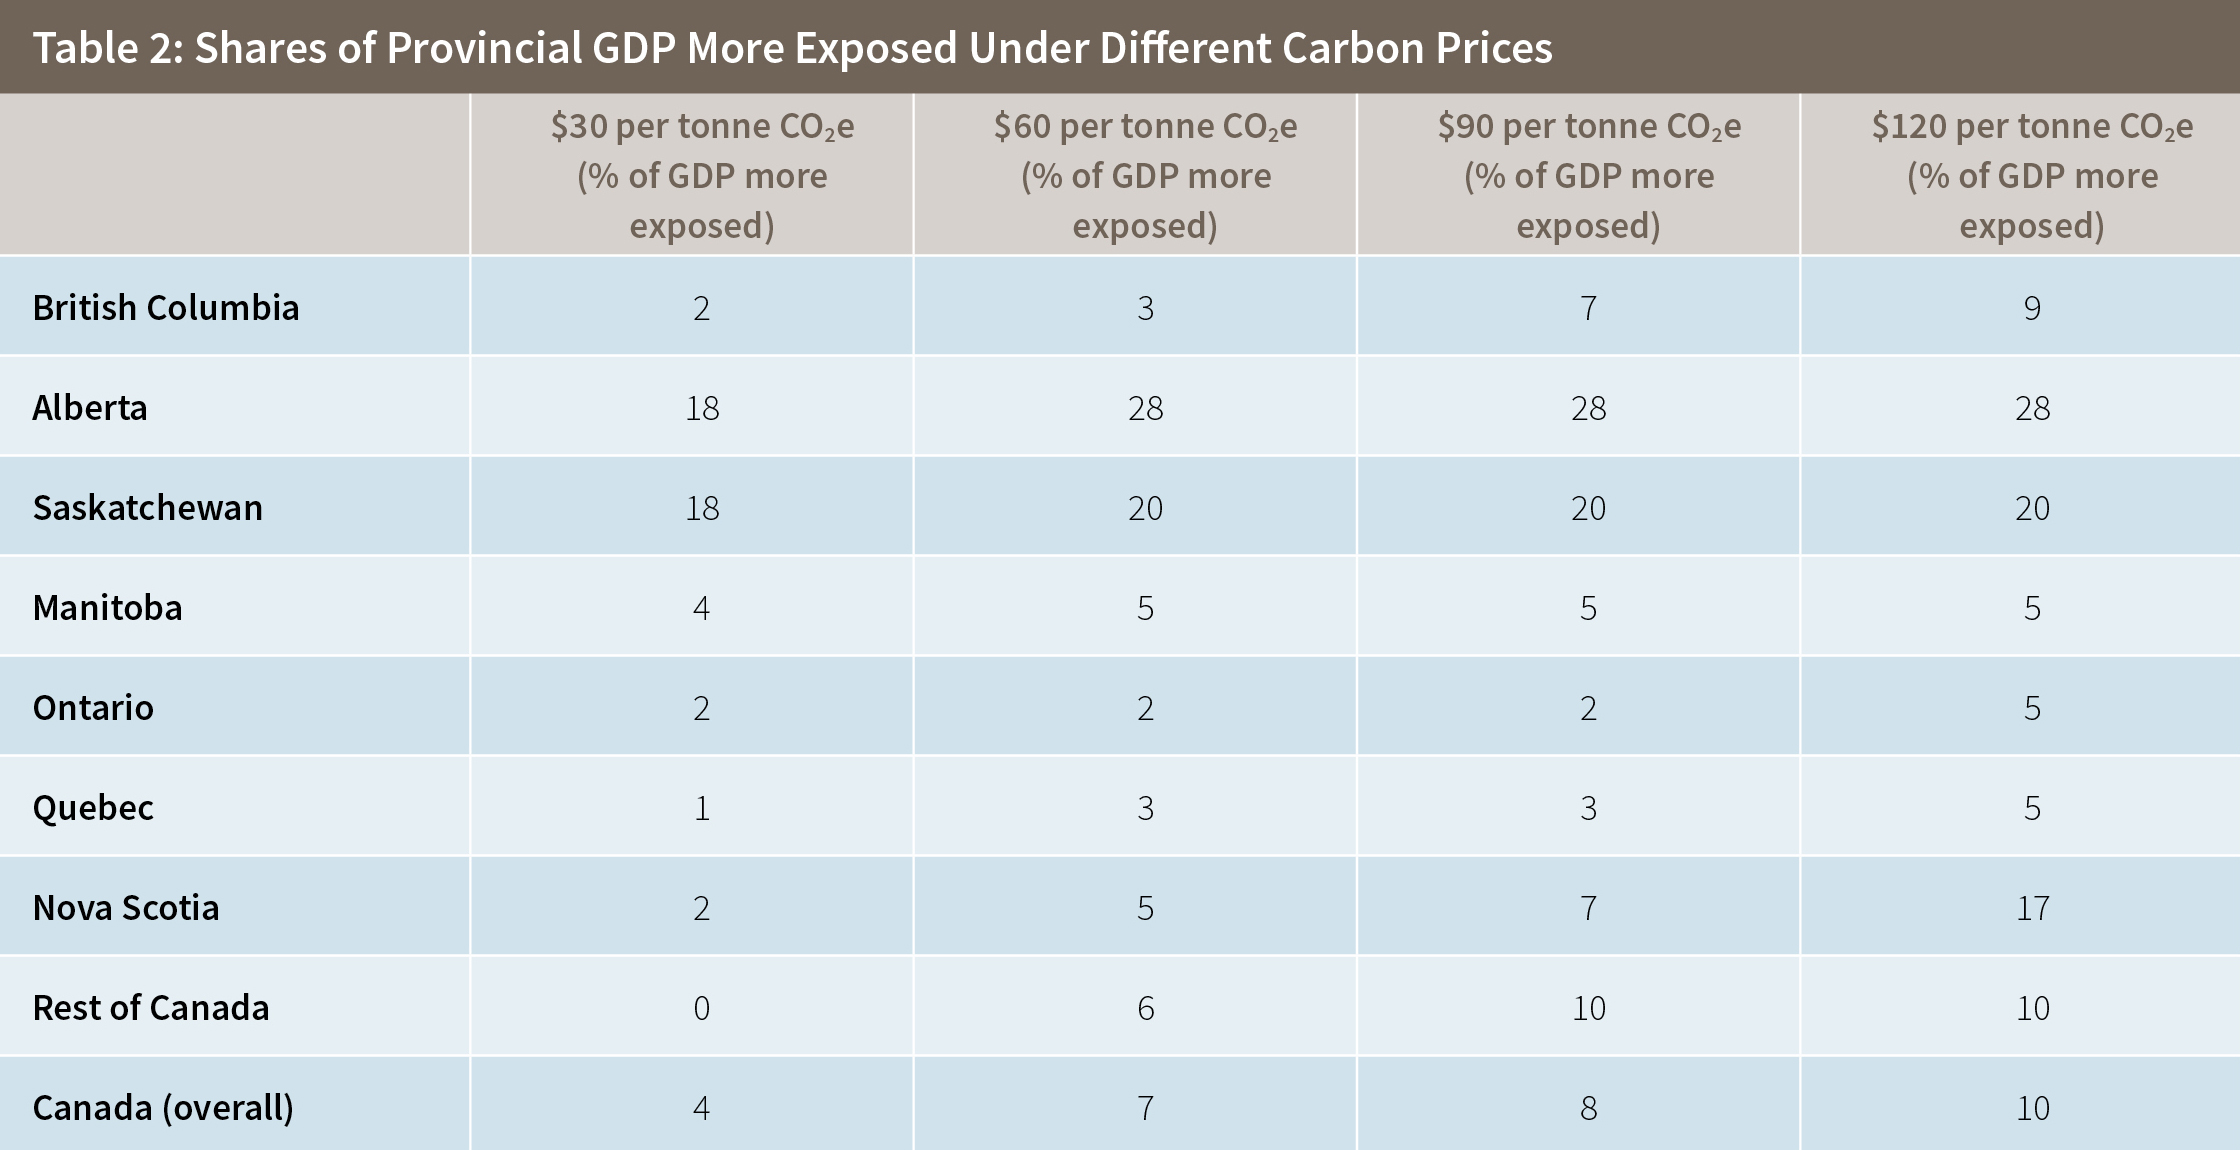 Table 2: Shares of Provincial GDP More Exposed Under Different Carbon Prices